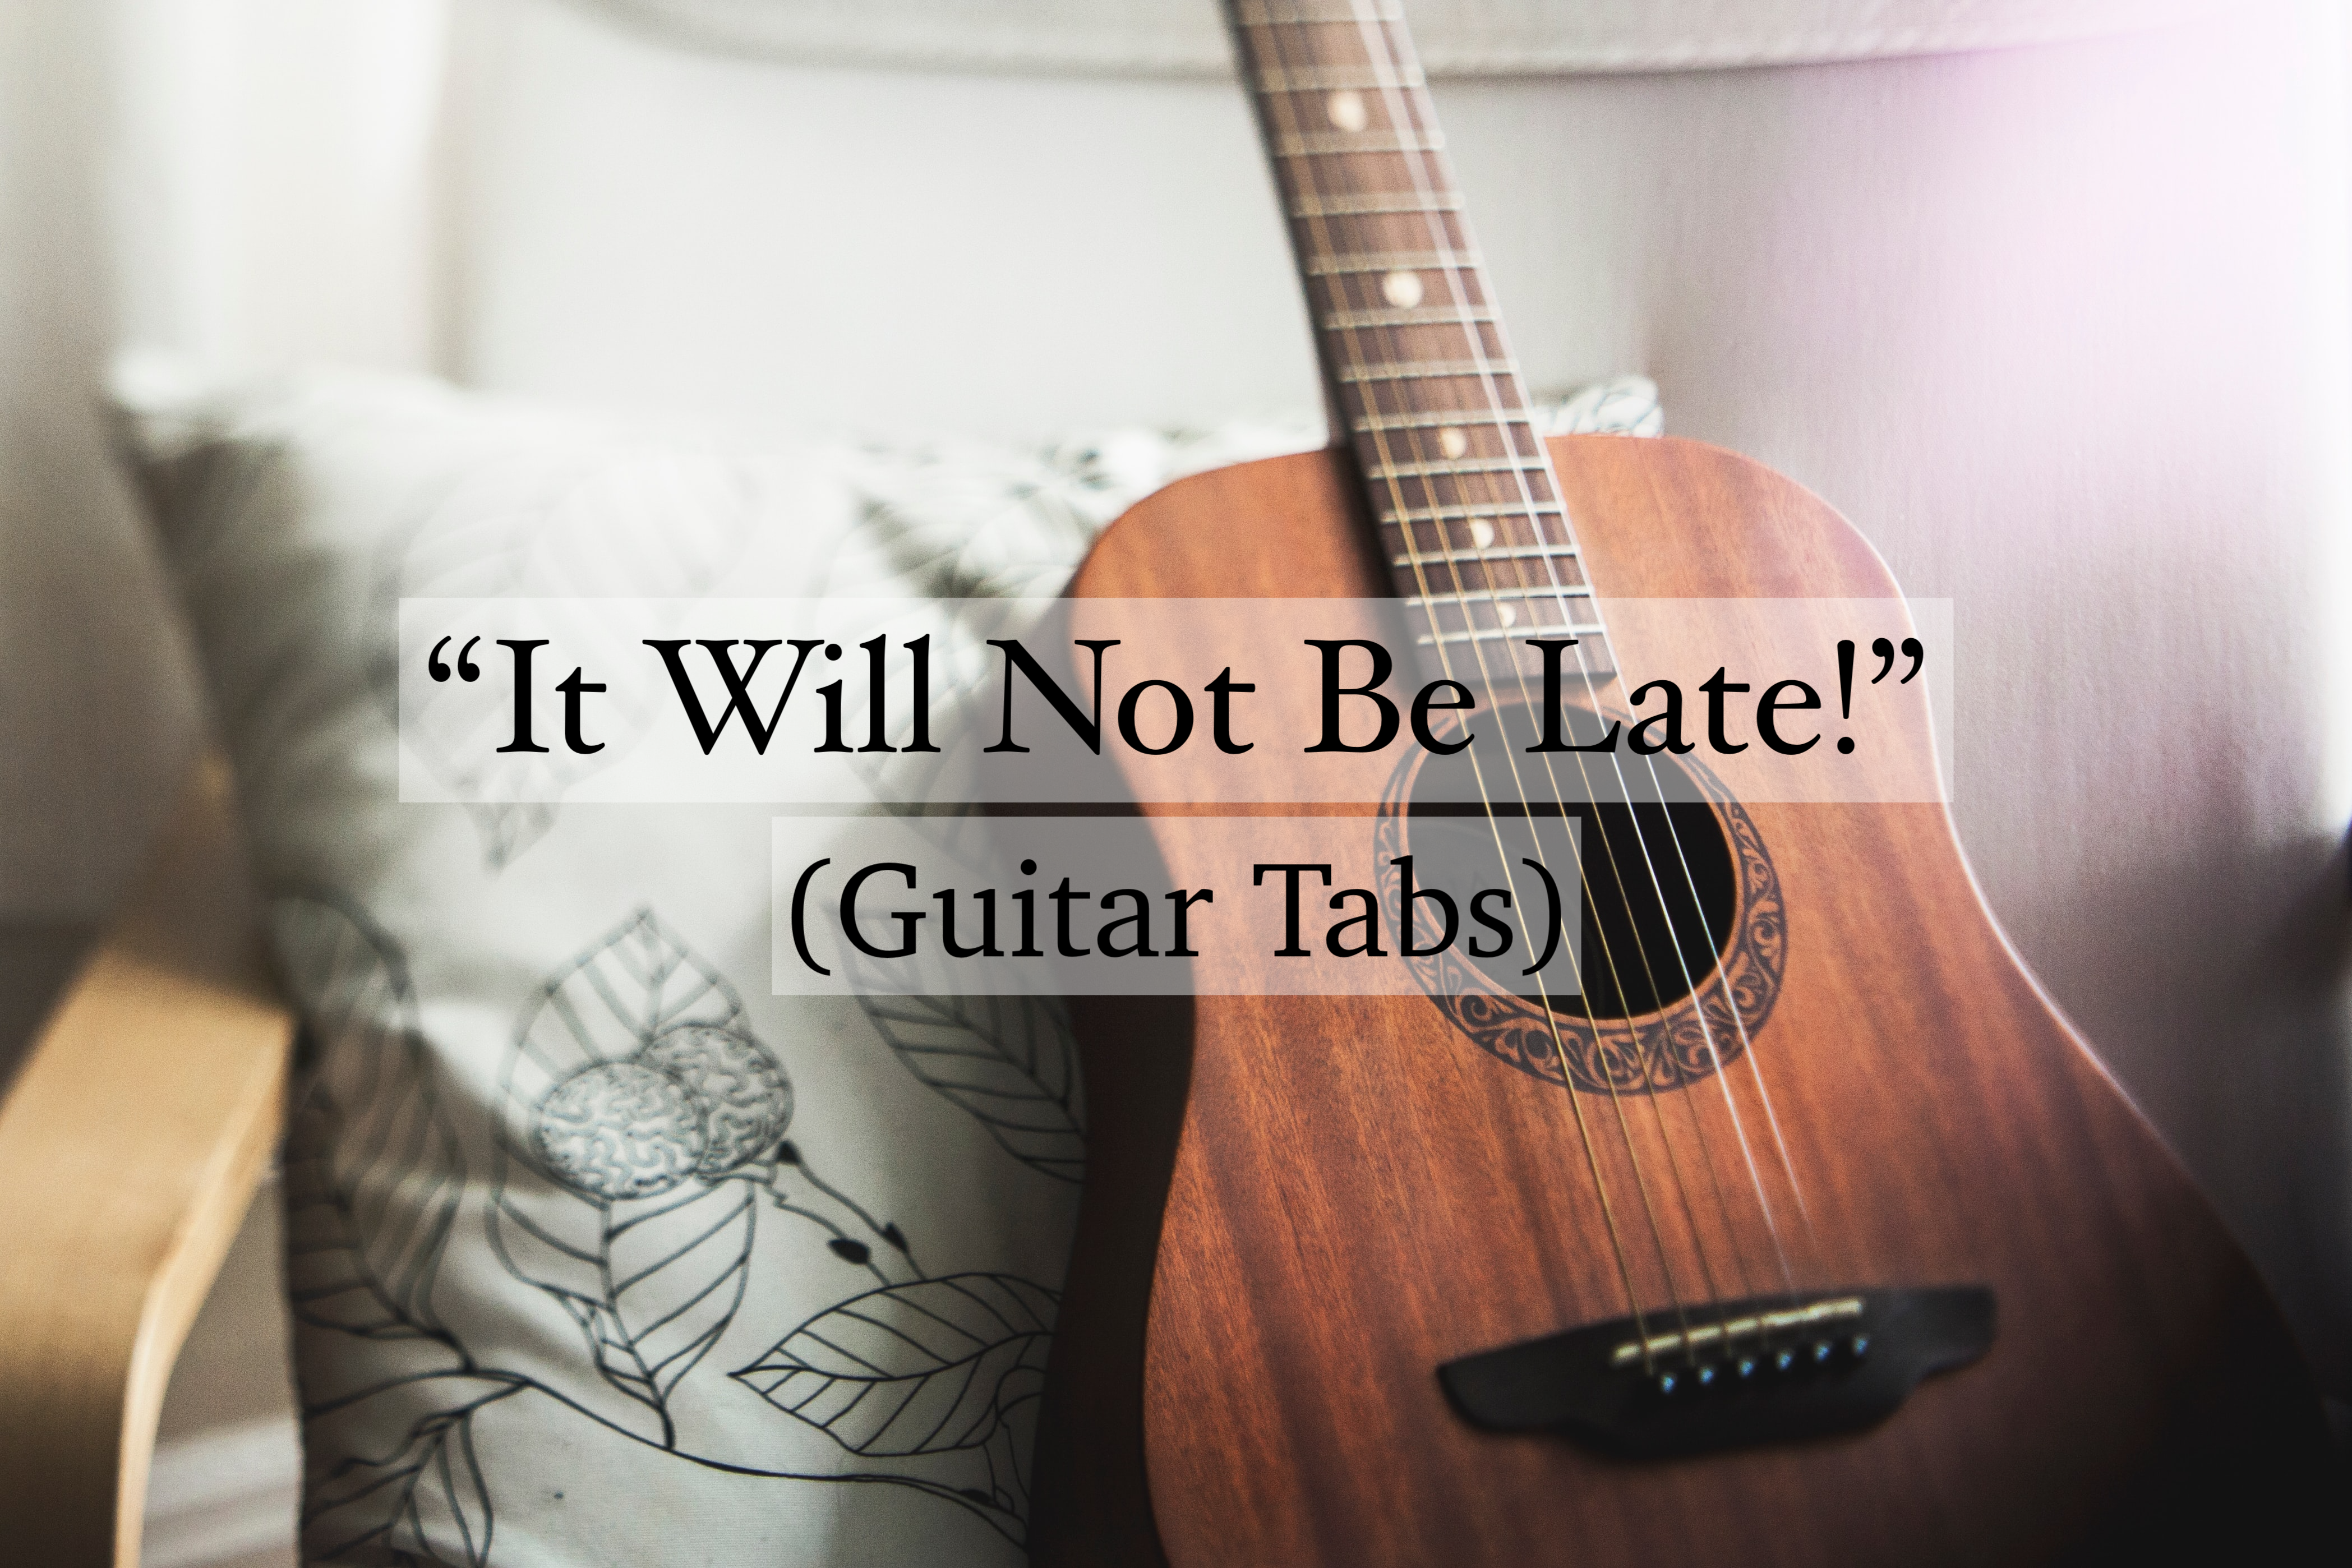 It Will Not Be Late!” (Guitar Tabs) 2023 Convention Song for JW Guitar Tabs at zeddrix.com